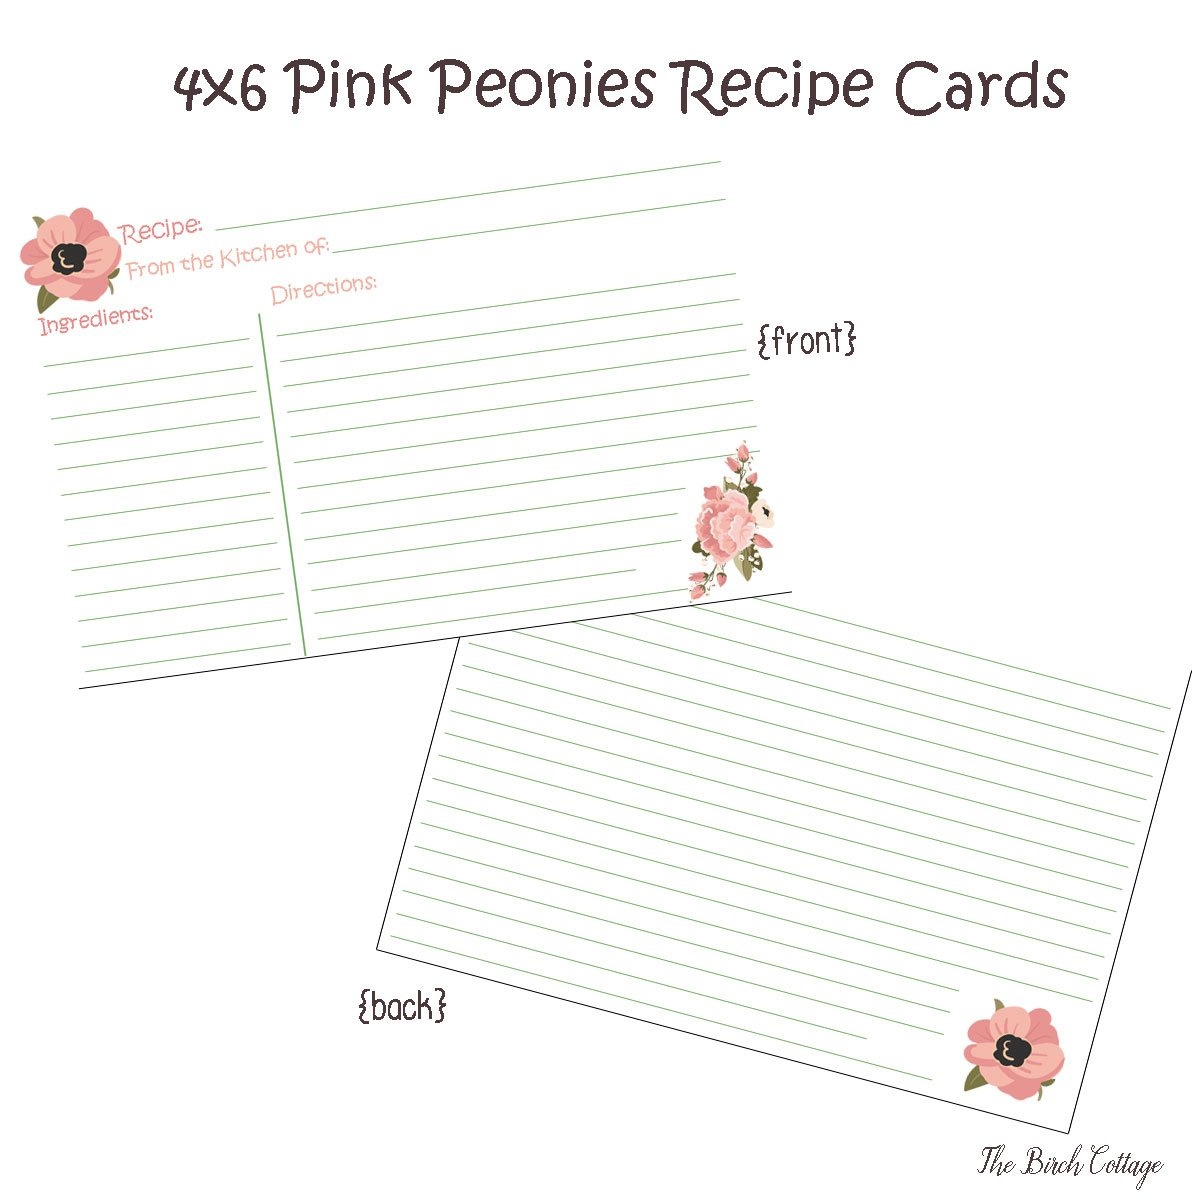 Free Printable 4X6 Pink Peonies Recipe Cards From The Birch Cottage - Free Printable Photo Cards 4X6